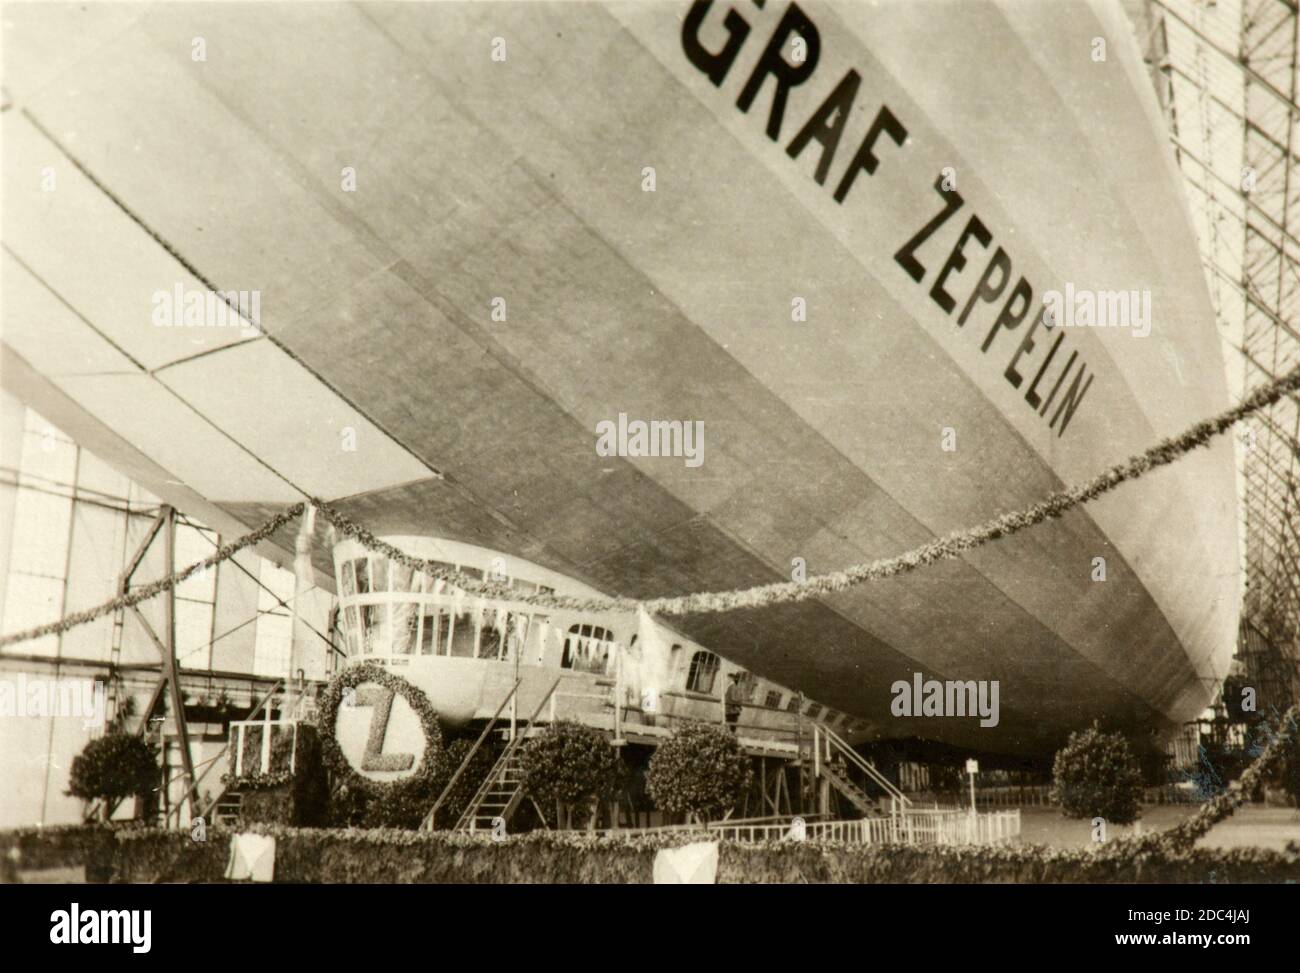 Construction works and details of the Graf Zeppelin LZ 127 Stock Photo